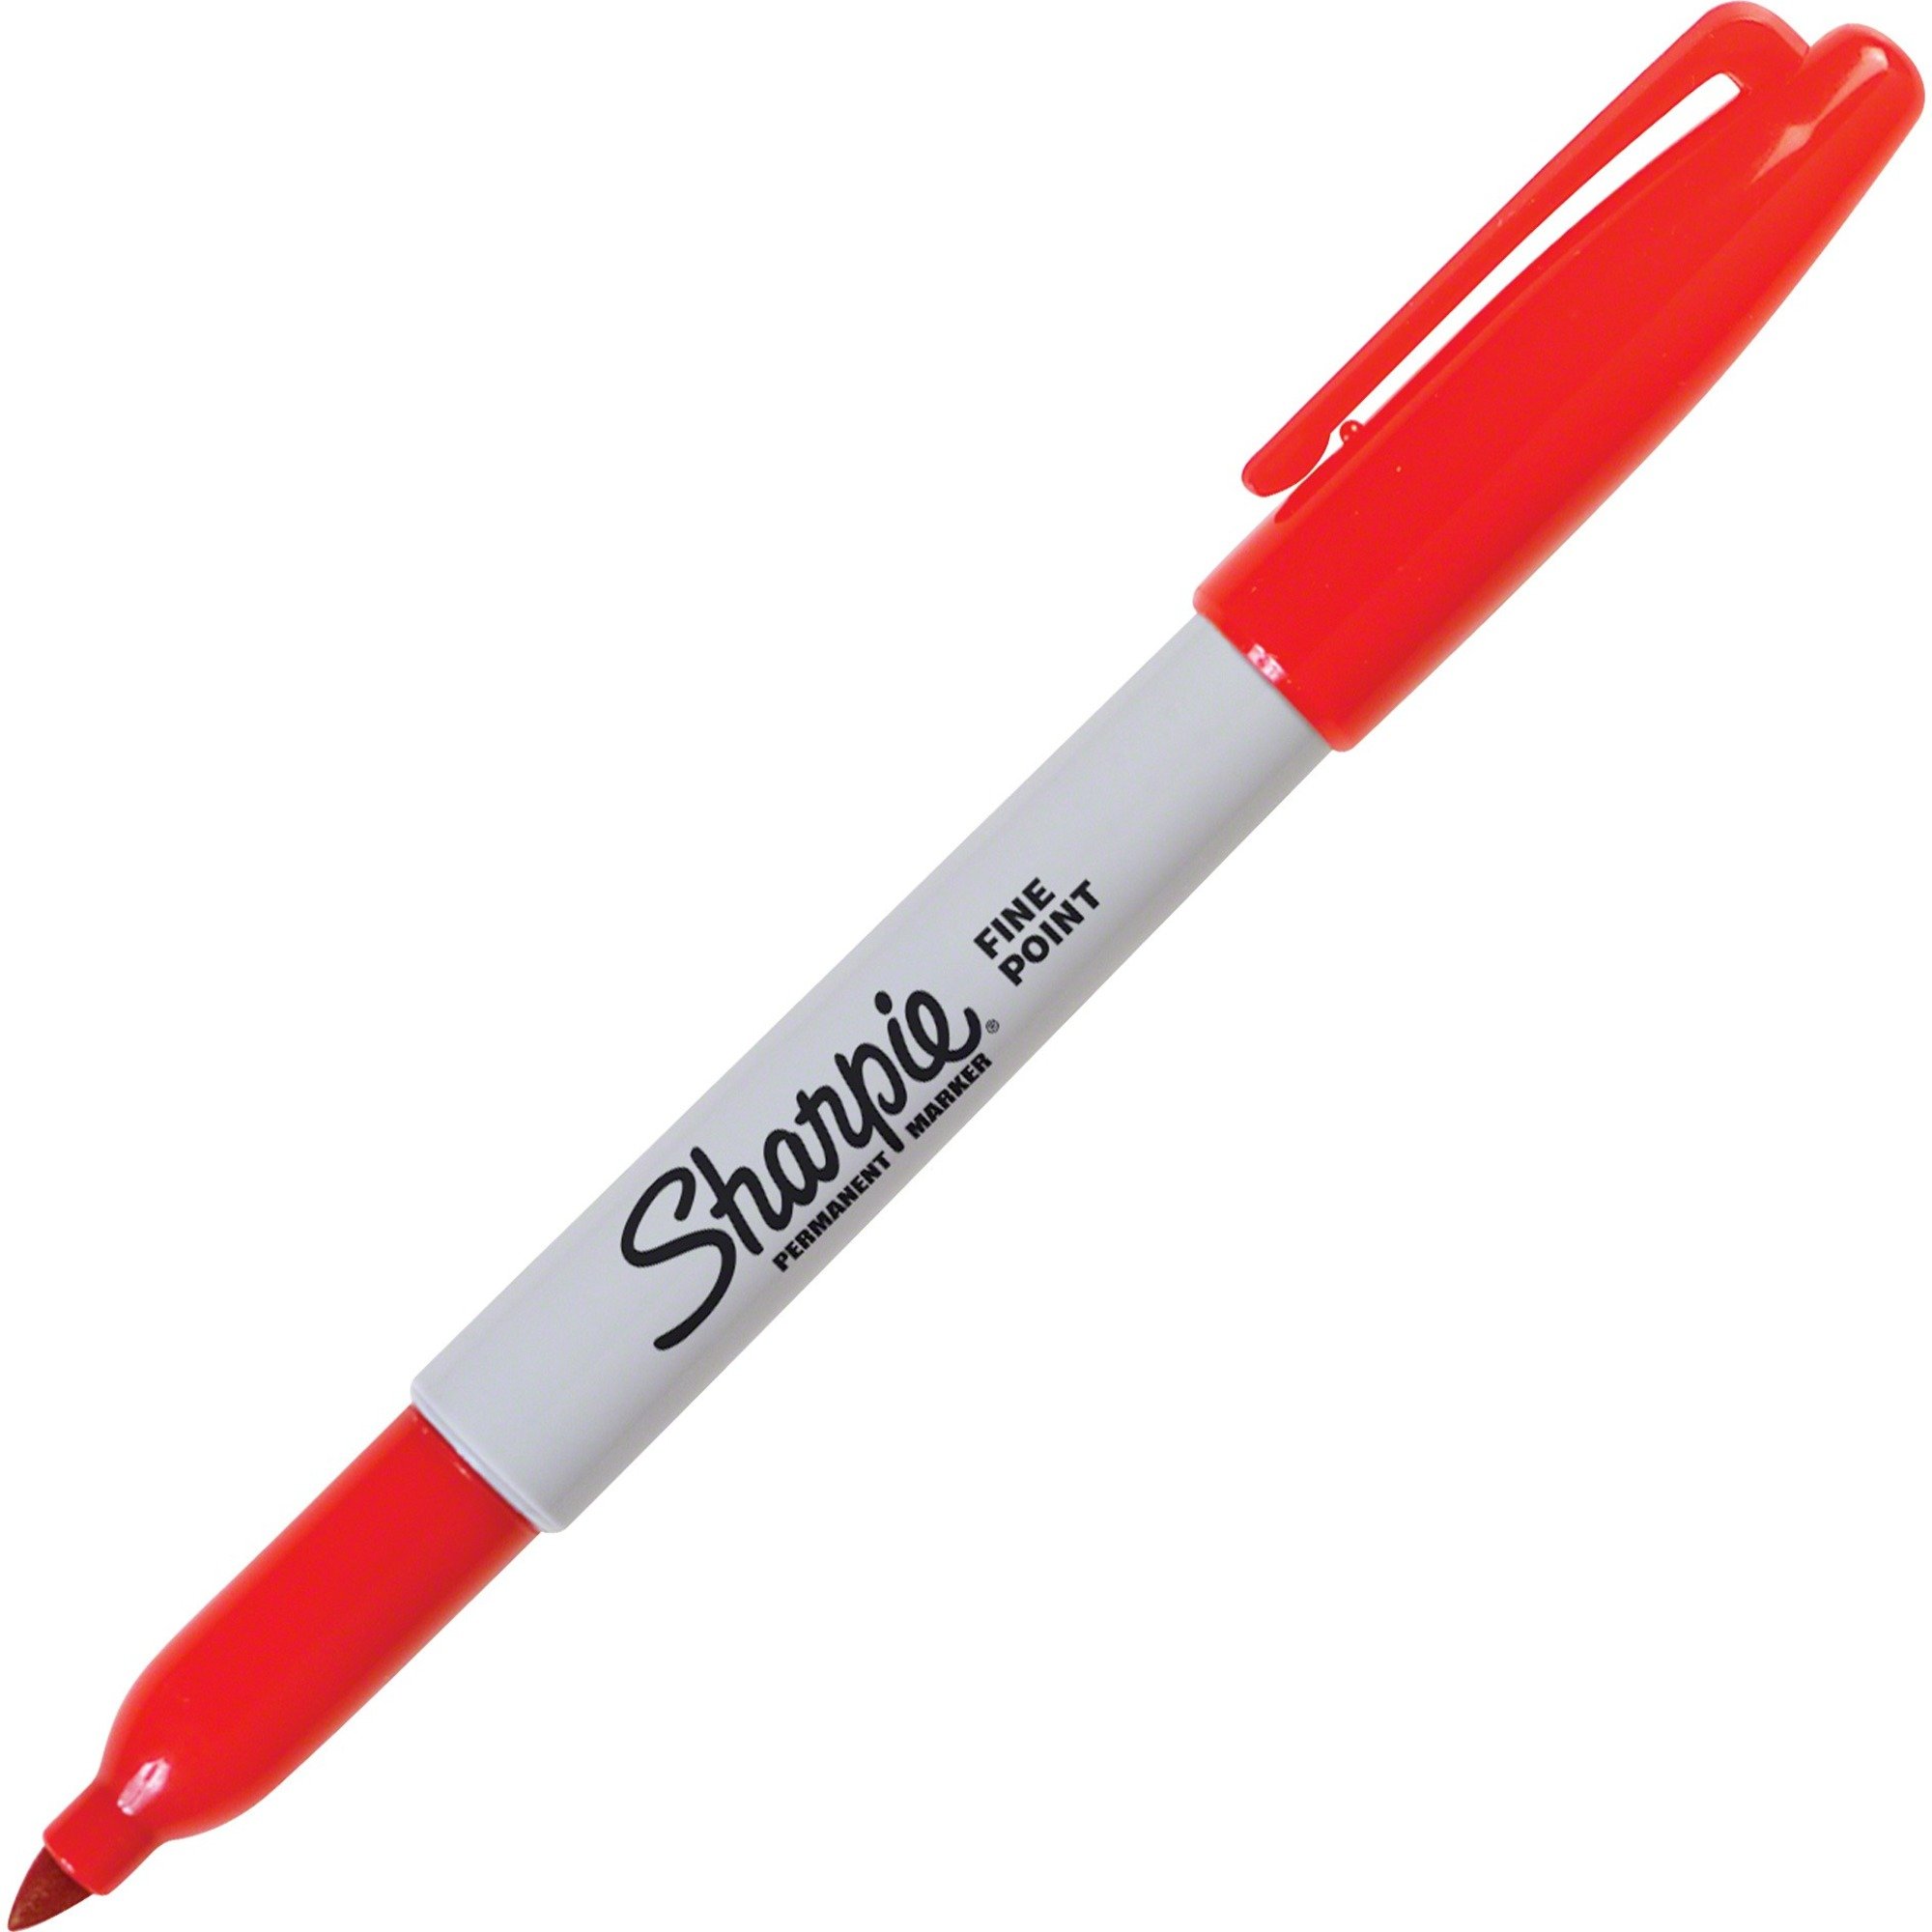 Sharpie Red Pen-style Permanent Marker - Each